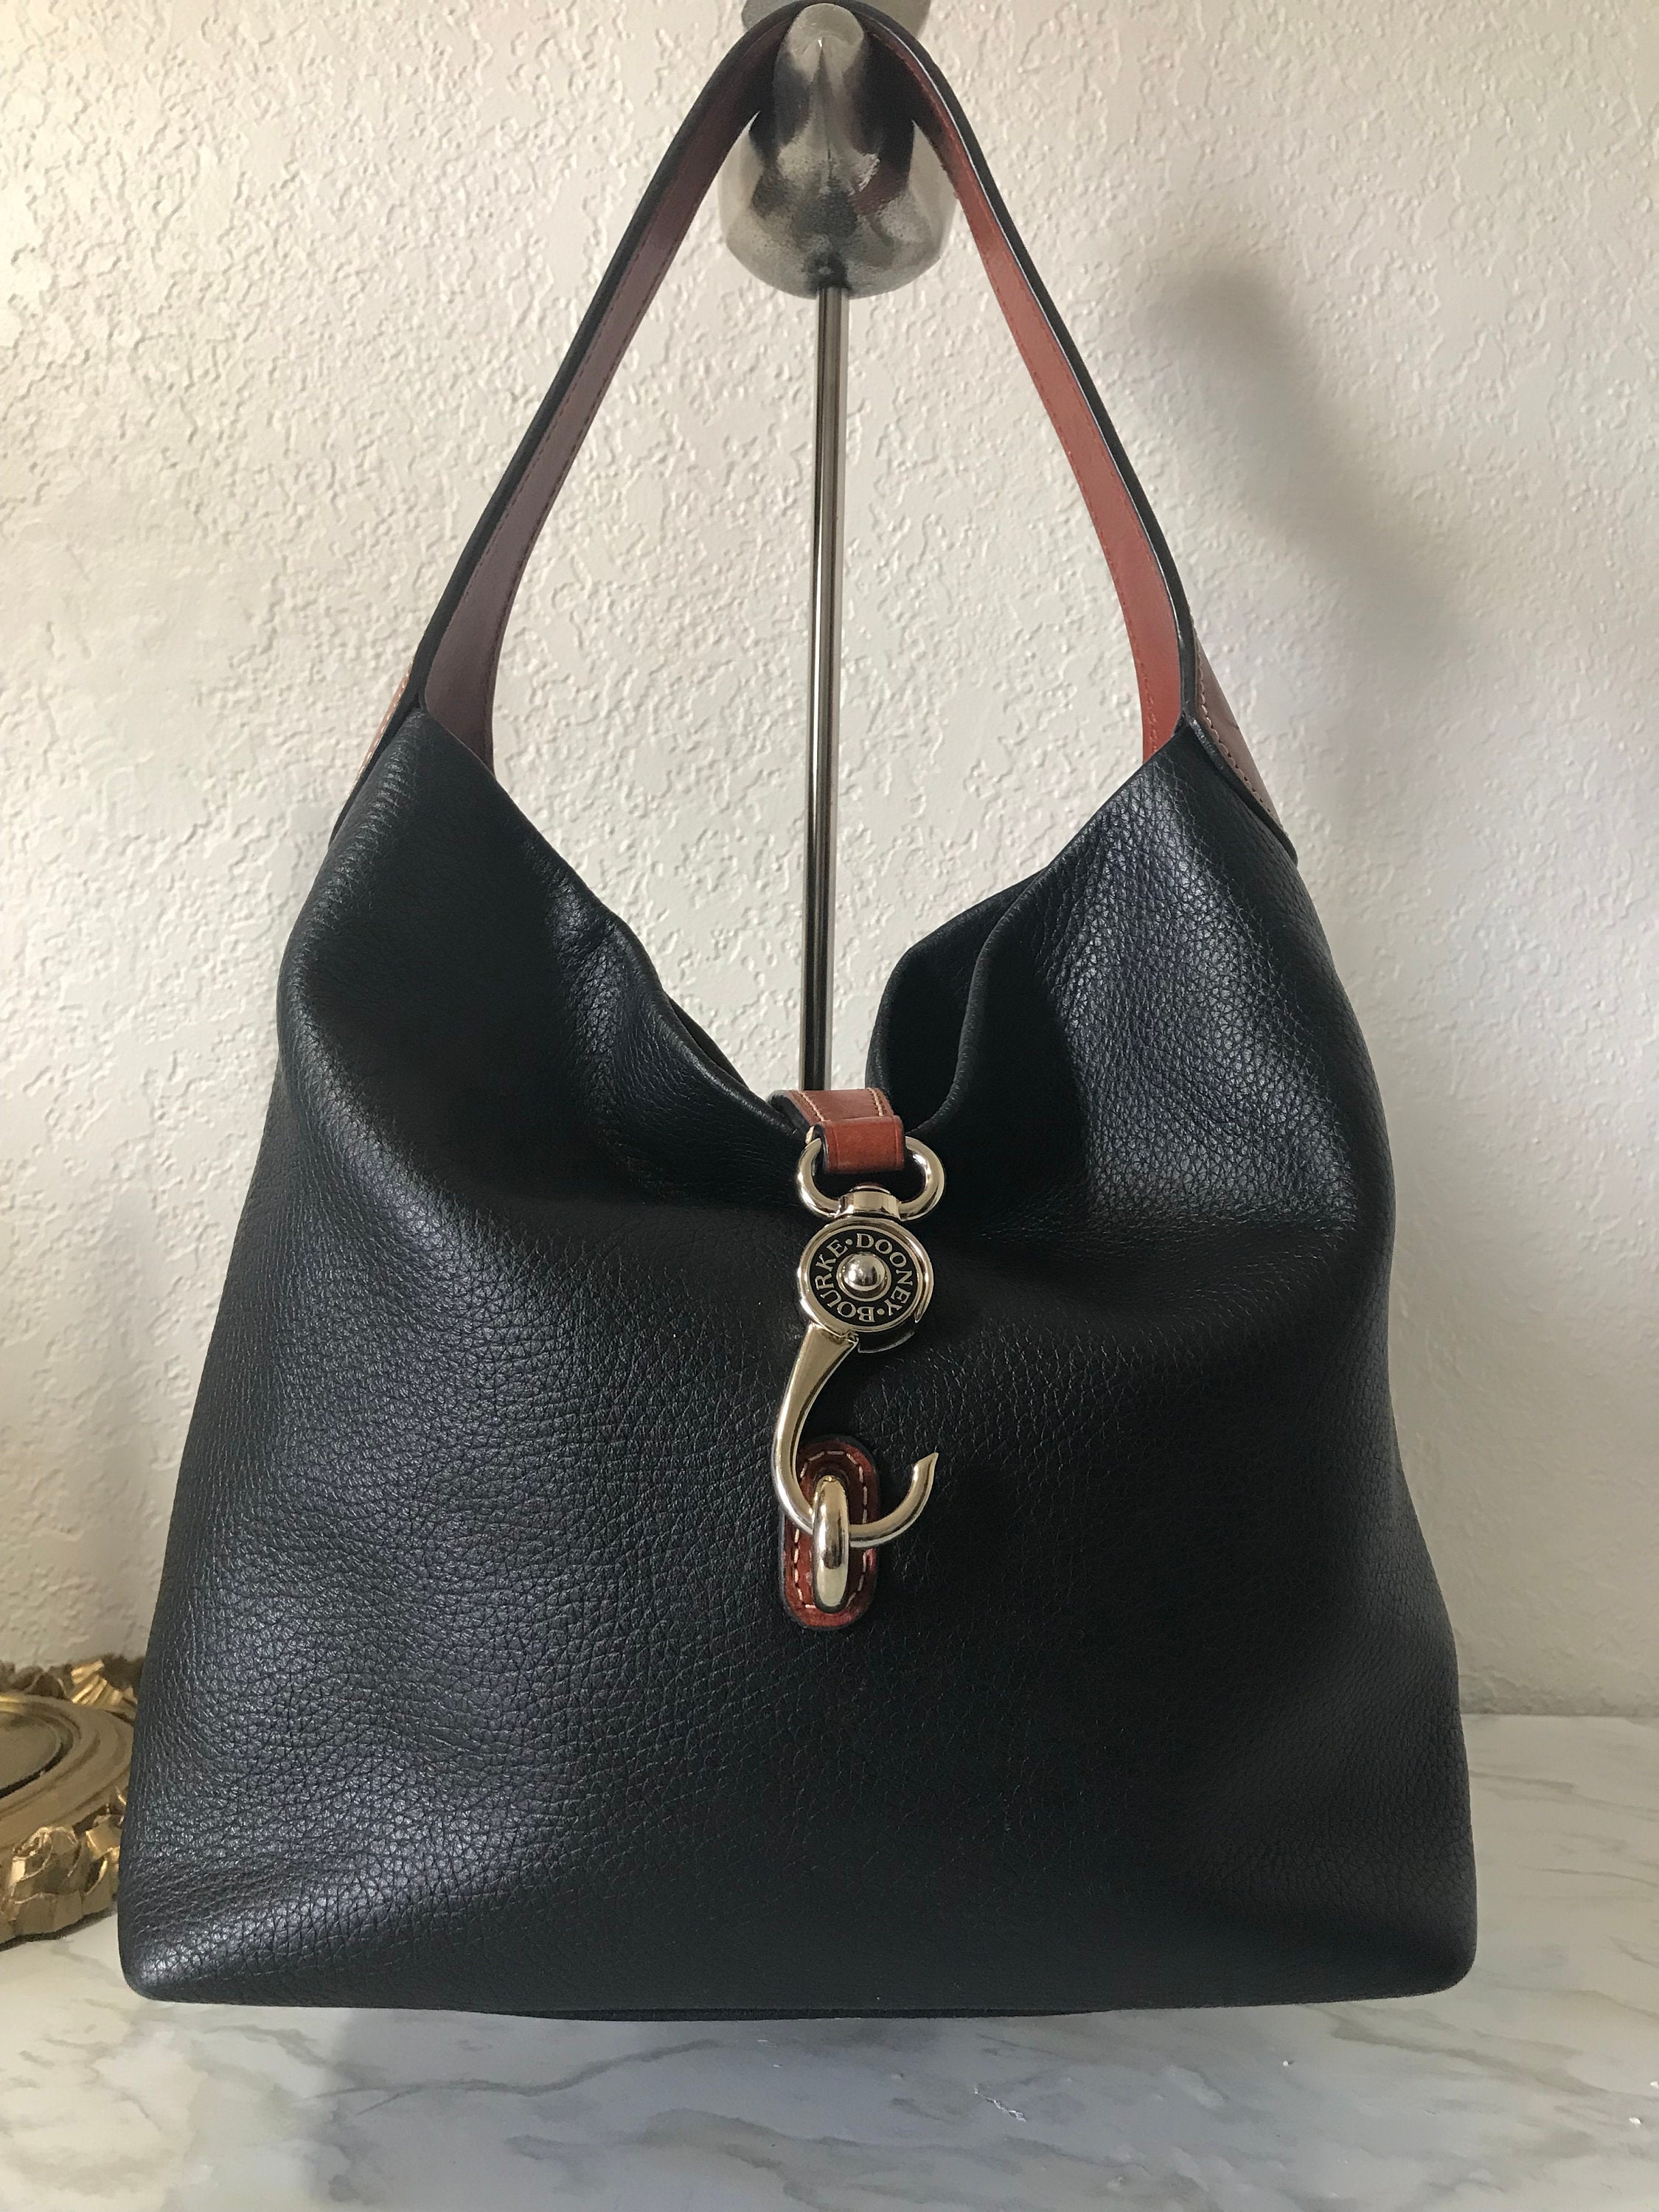 Dooney and Bourke Black Pebbled and Natural Leather Handbag Purse Tote, Dooney and Bourke Leather Handbag Purse Tote Bag, Dooney & Bourke